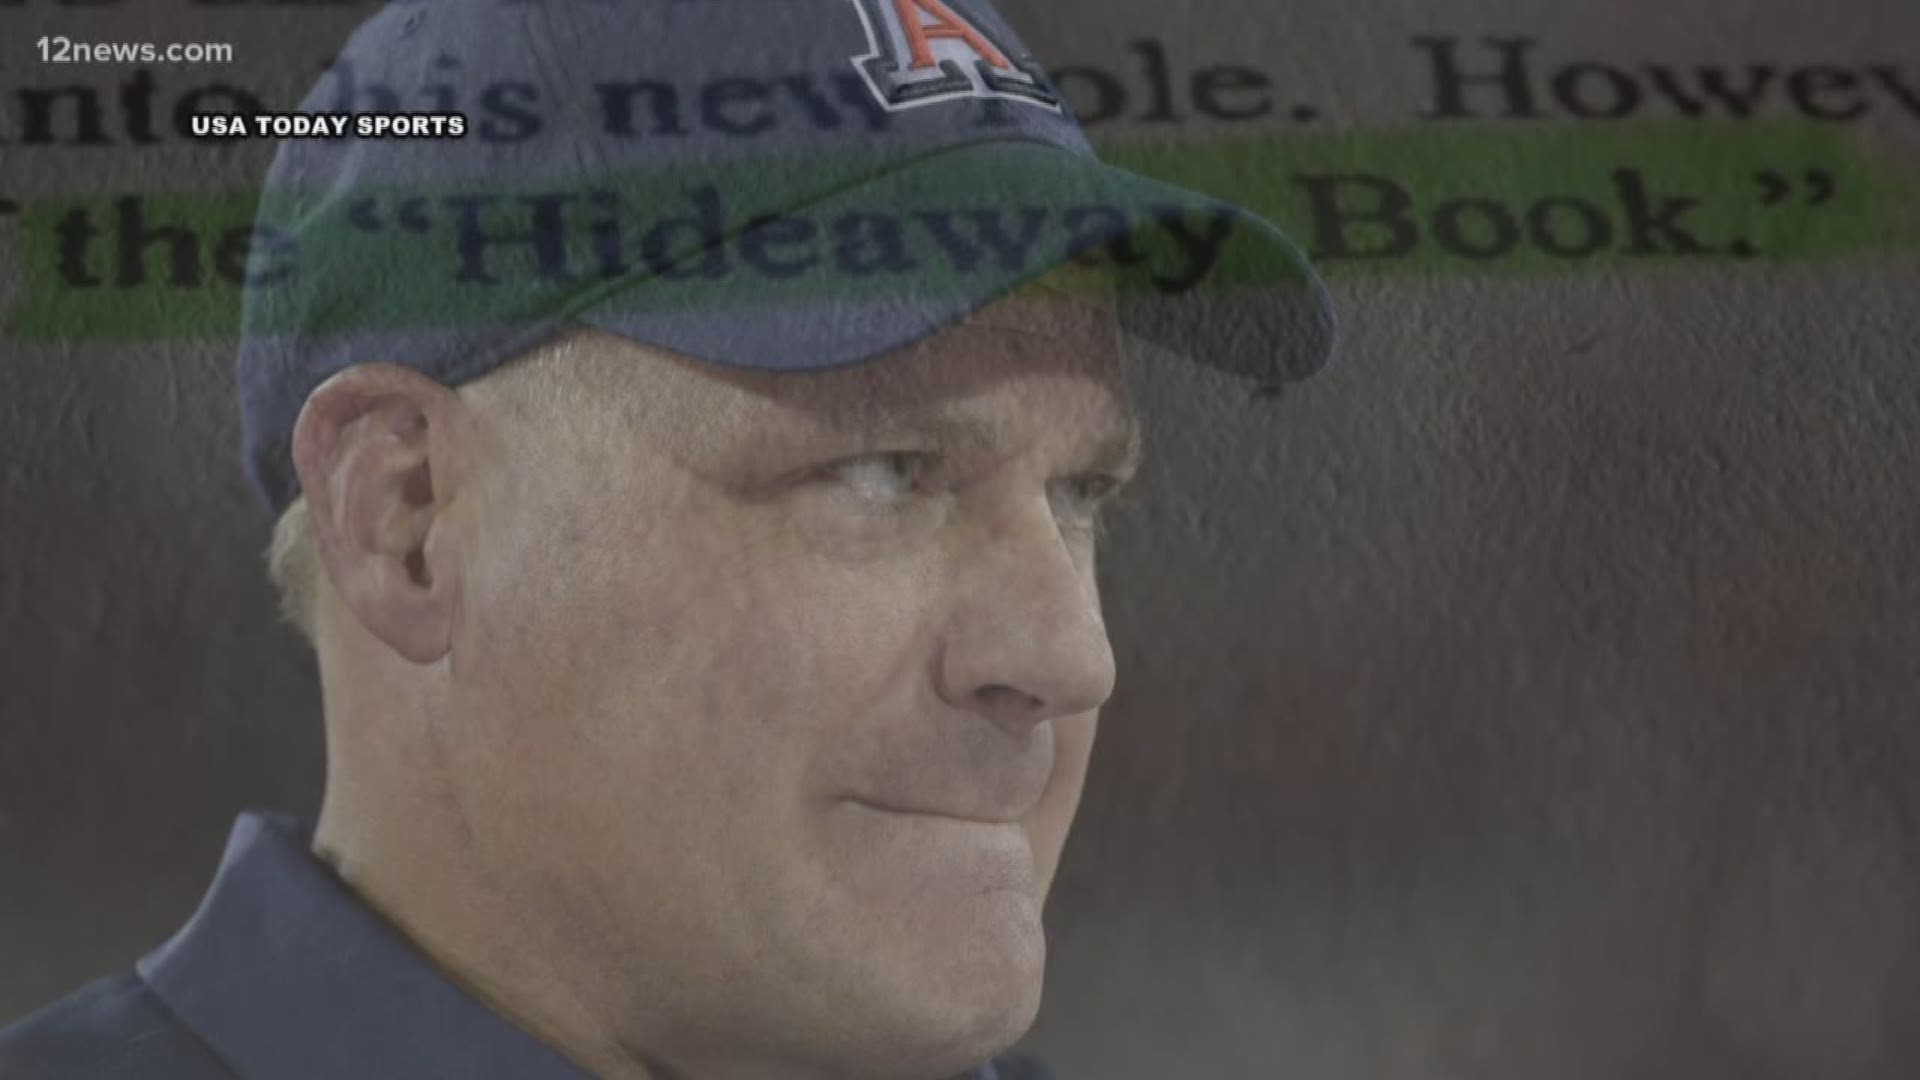 Allegations of harassment and revelations into the death of Zach Hemmila led to Arizona Wildcats head football coach Rich Rodriguez's firing.